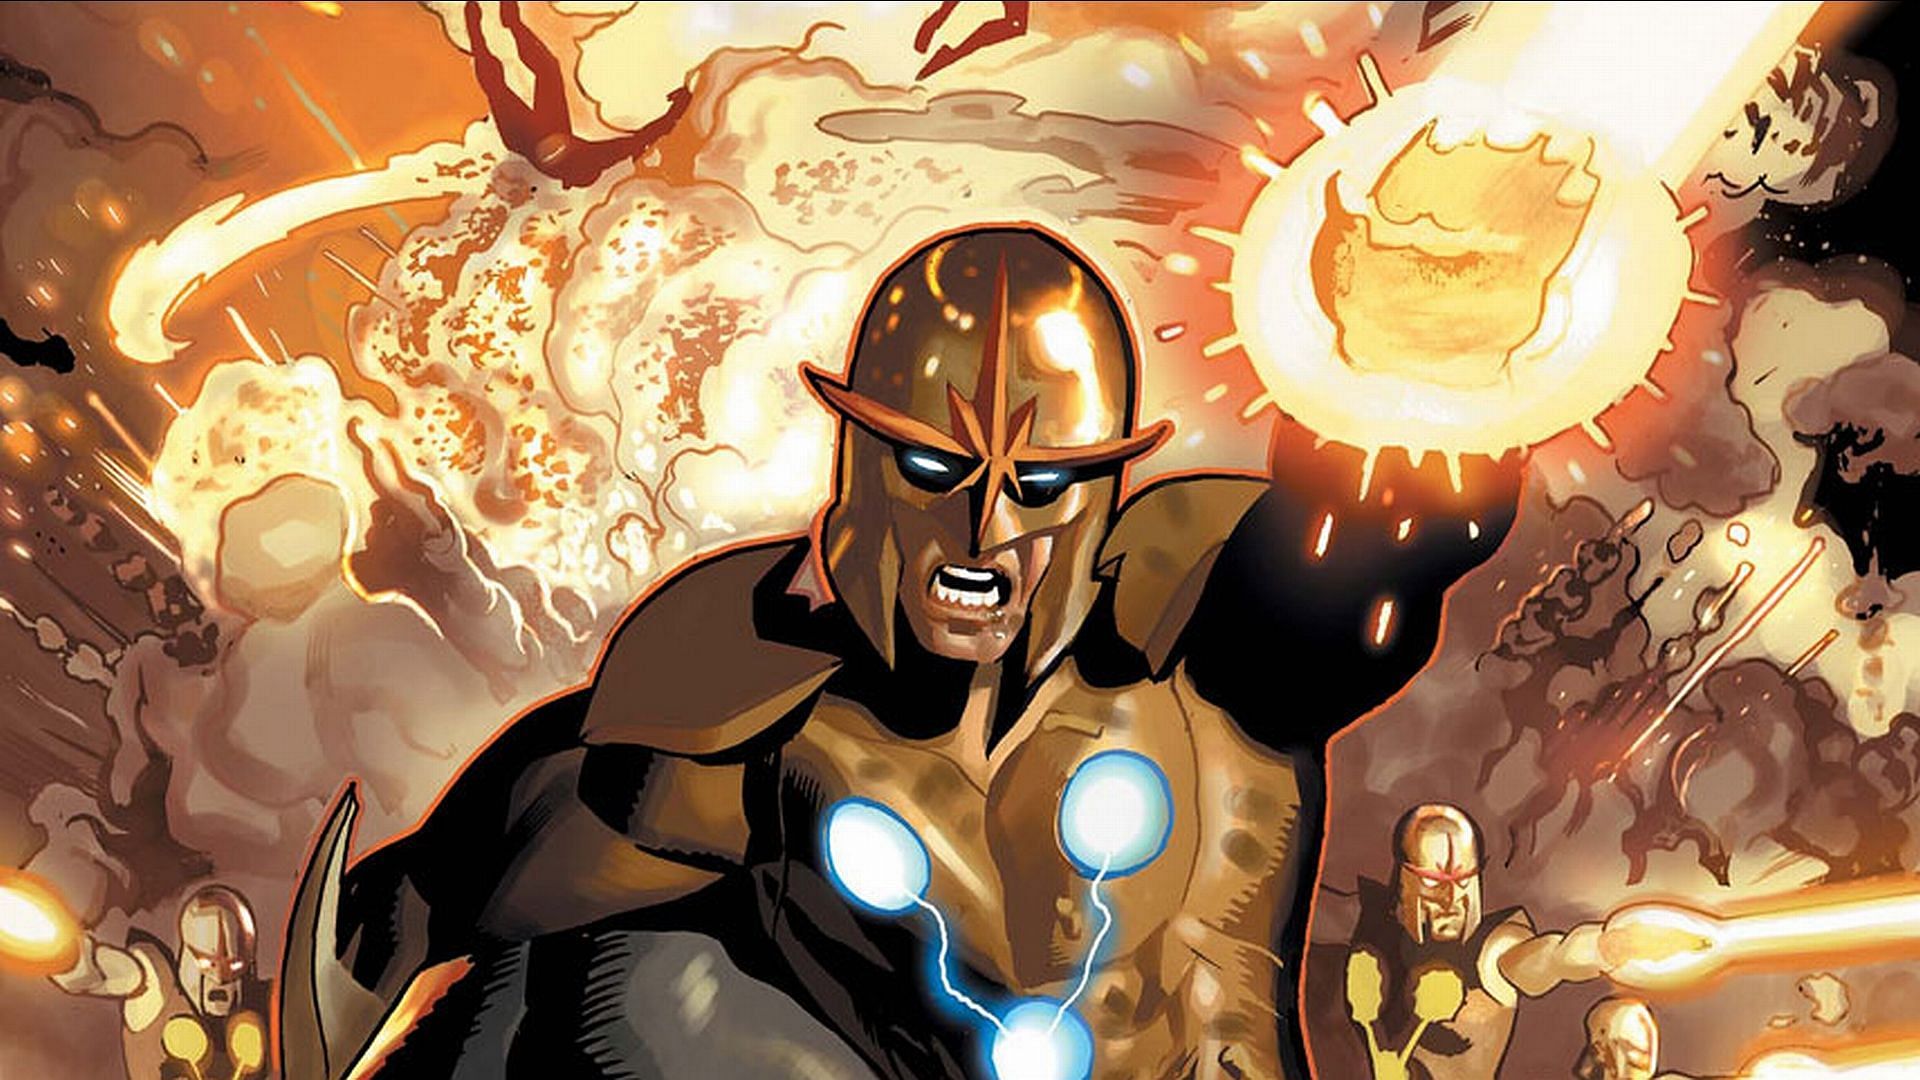 Richard Rider, otherwise known as Nova, is a treasured member of the Nova Corps. (Image via Marvel)